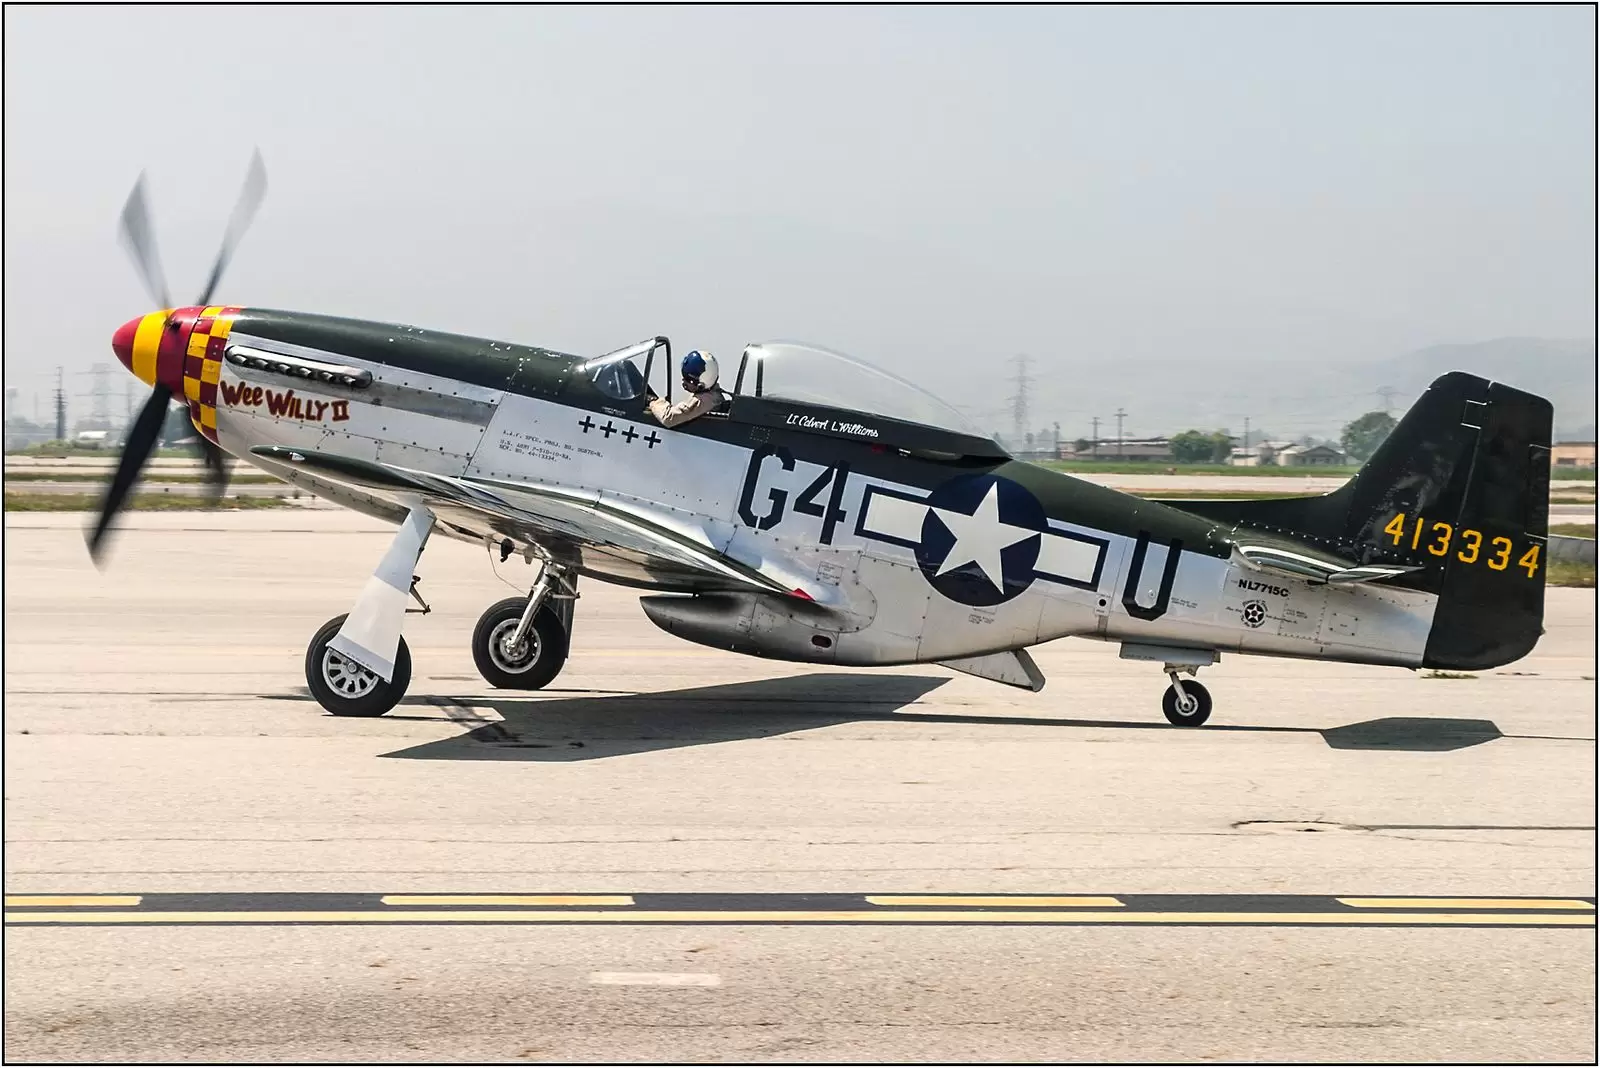 Amazing facts about North American P-51 Mustang